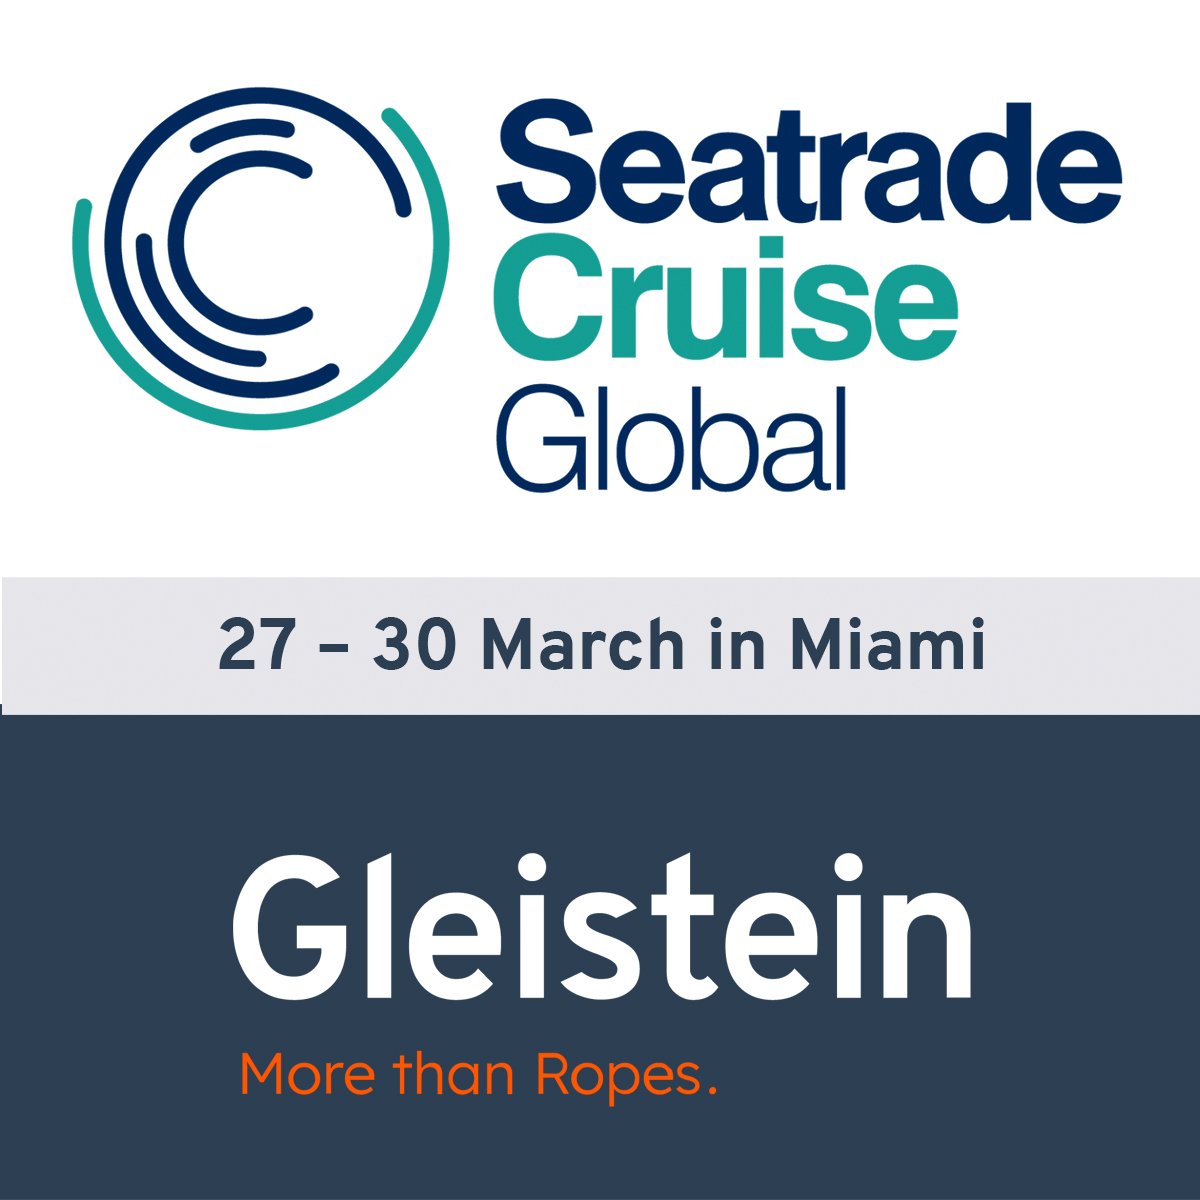 Meet us today in Miami. Gleistein at Seatrade Cruise Global, 27 - 30 March 2023 at booth 1139-05 German Pavilion.
Discover the safest and most sustainable mooring system at our booth.
#Gleistein
#STCGlobal
#Mooring
#Cruiseship
#Cruiseindustry 
#Wearecruise